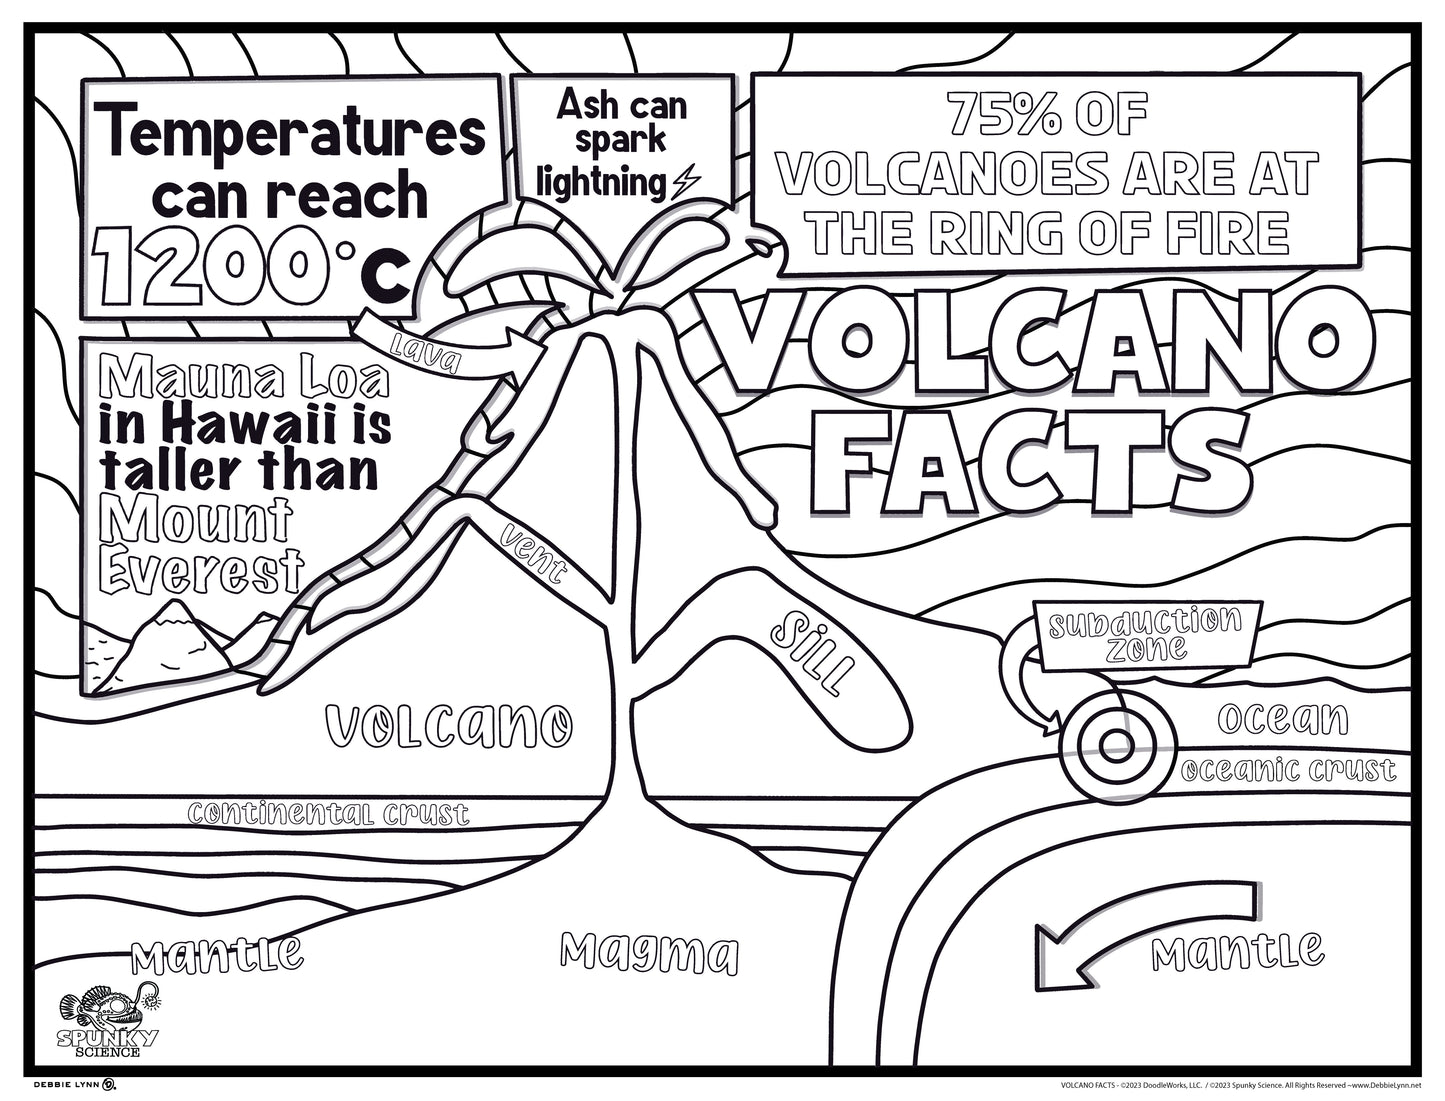 Volcano Facts Spunky Science Personalized Giant Coloring Poster 46"x60"